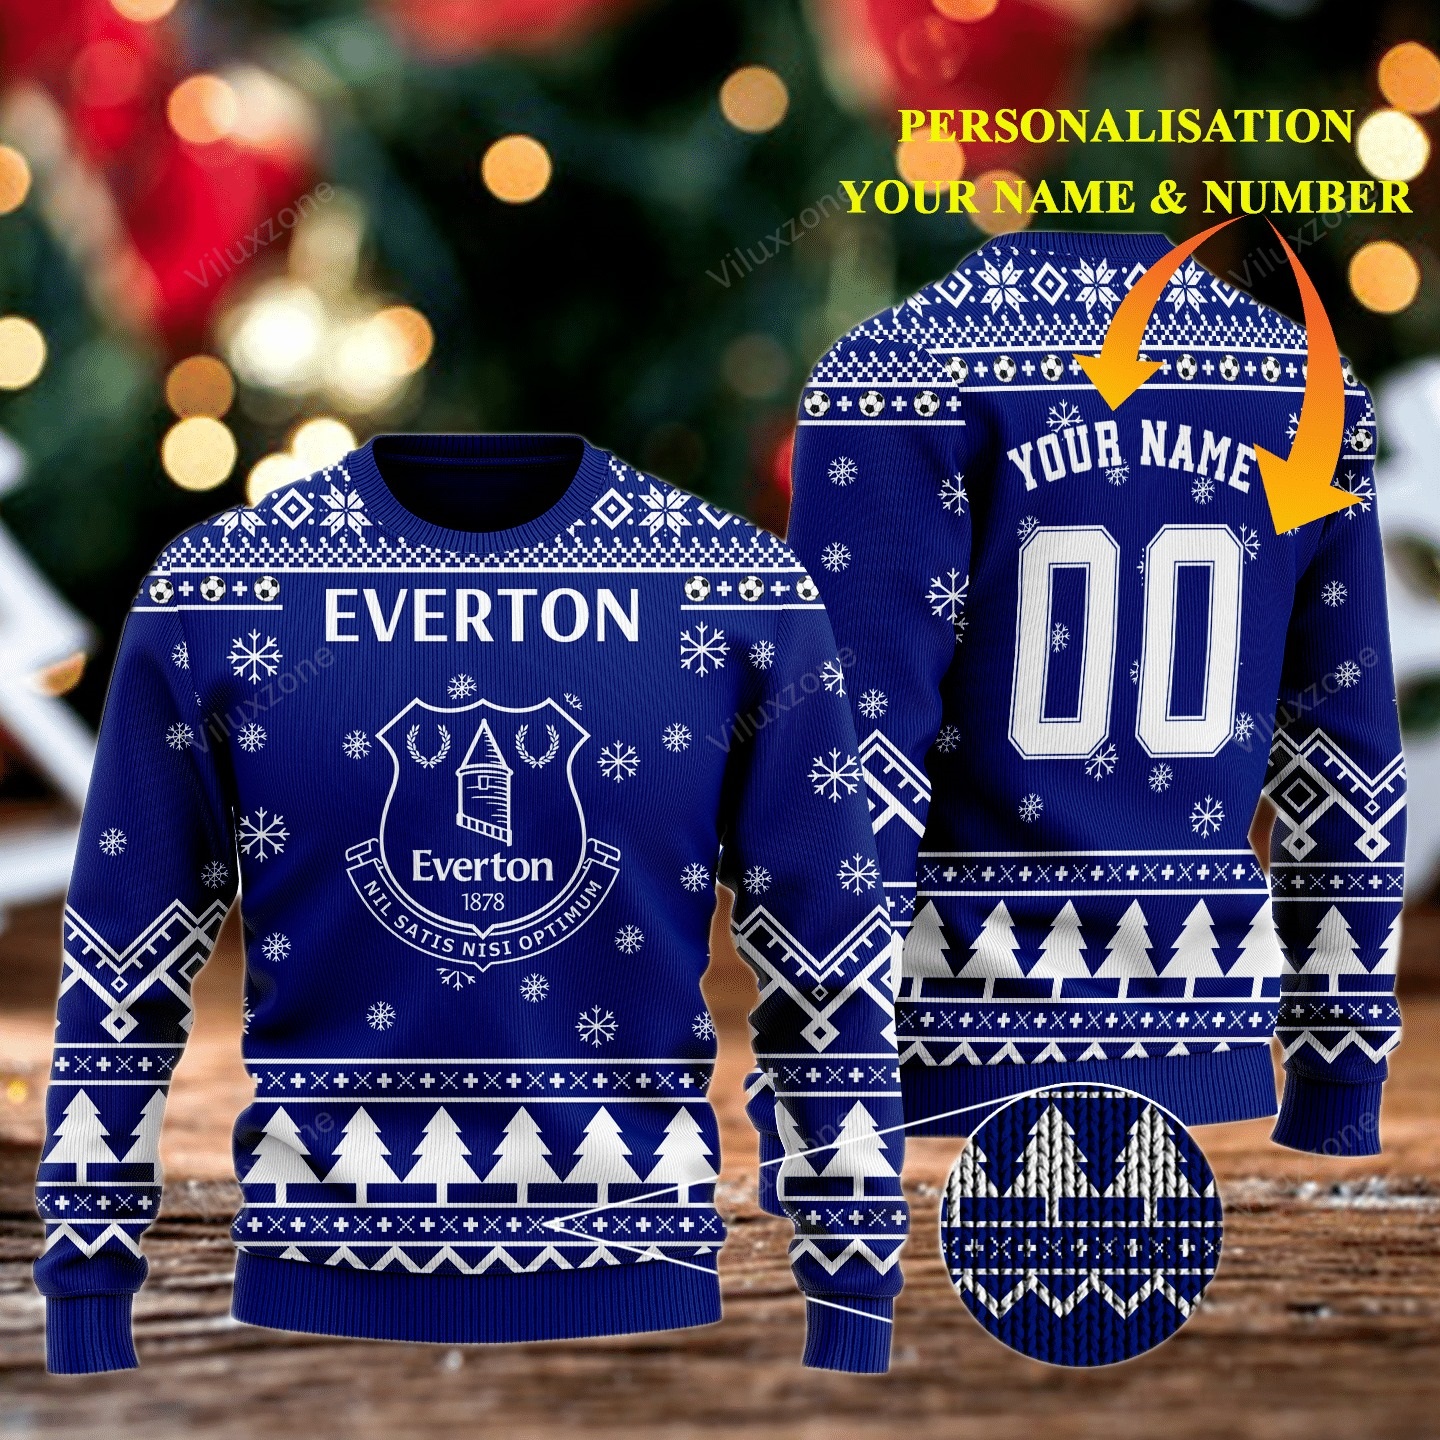 Everton FC personalized name and number 3d xmas sweater jumper